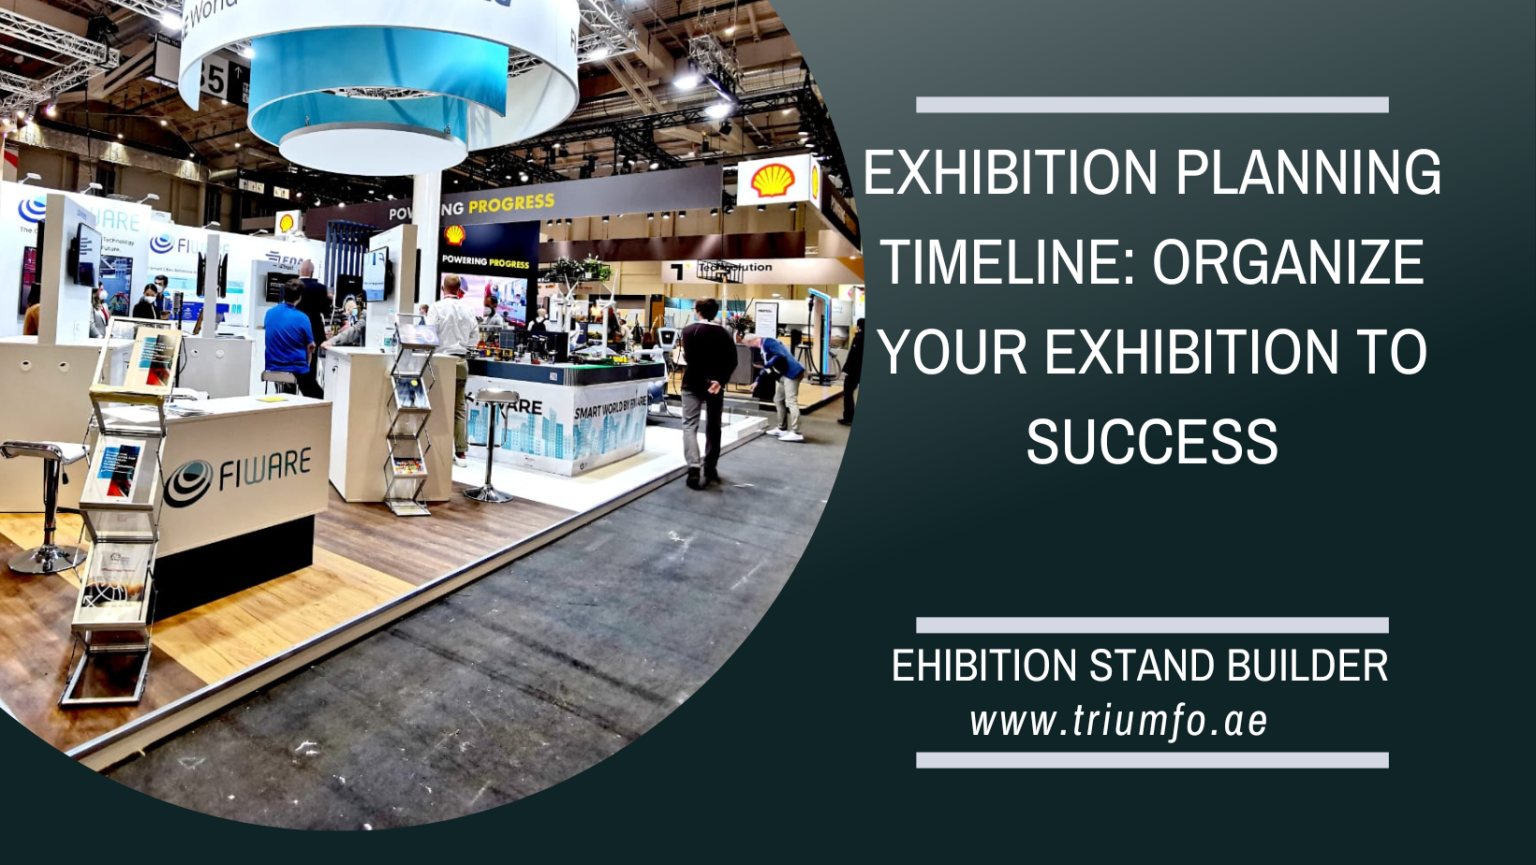 EXHIBITION PLANNING TIMELINE: ORGANIZE YOUR EXHIBITION TO SUCCESS